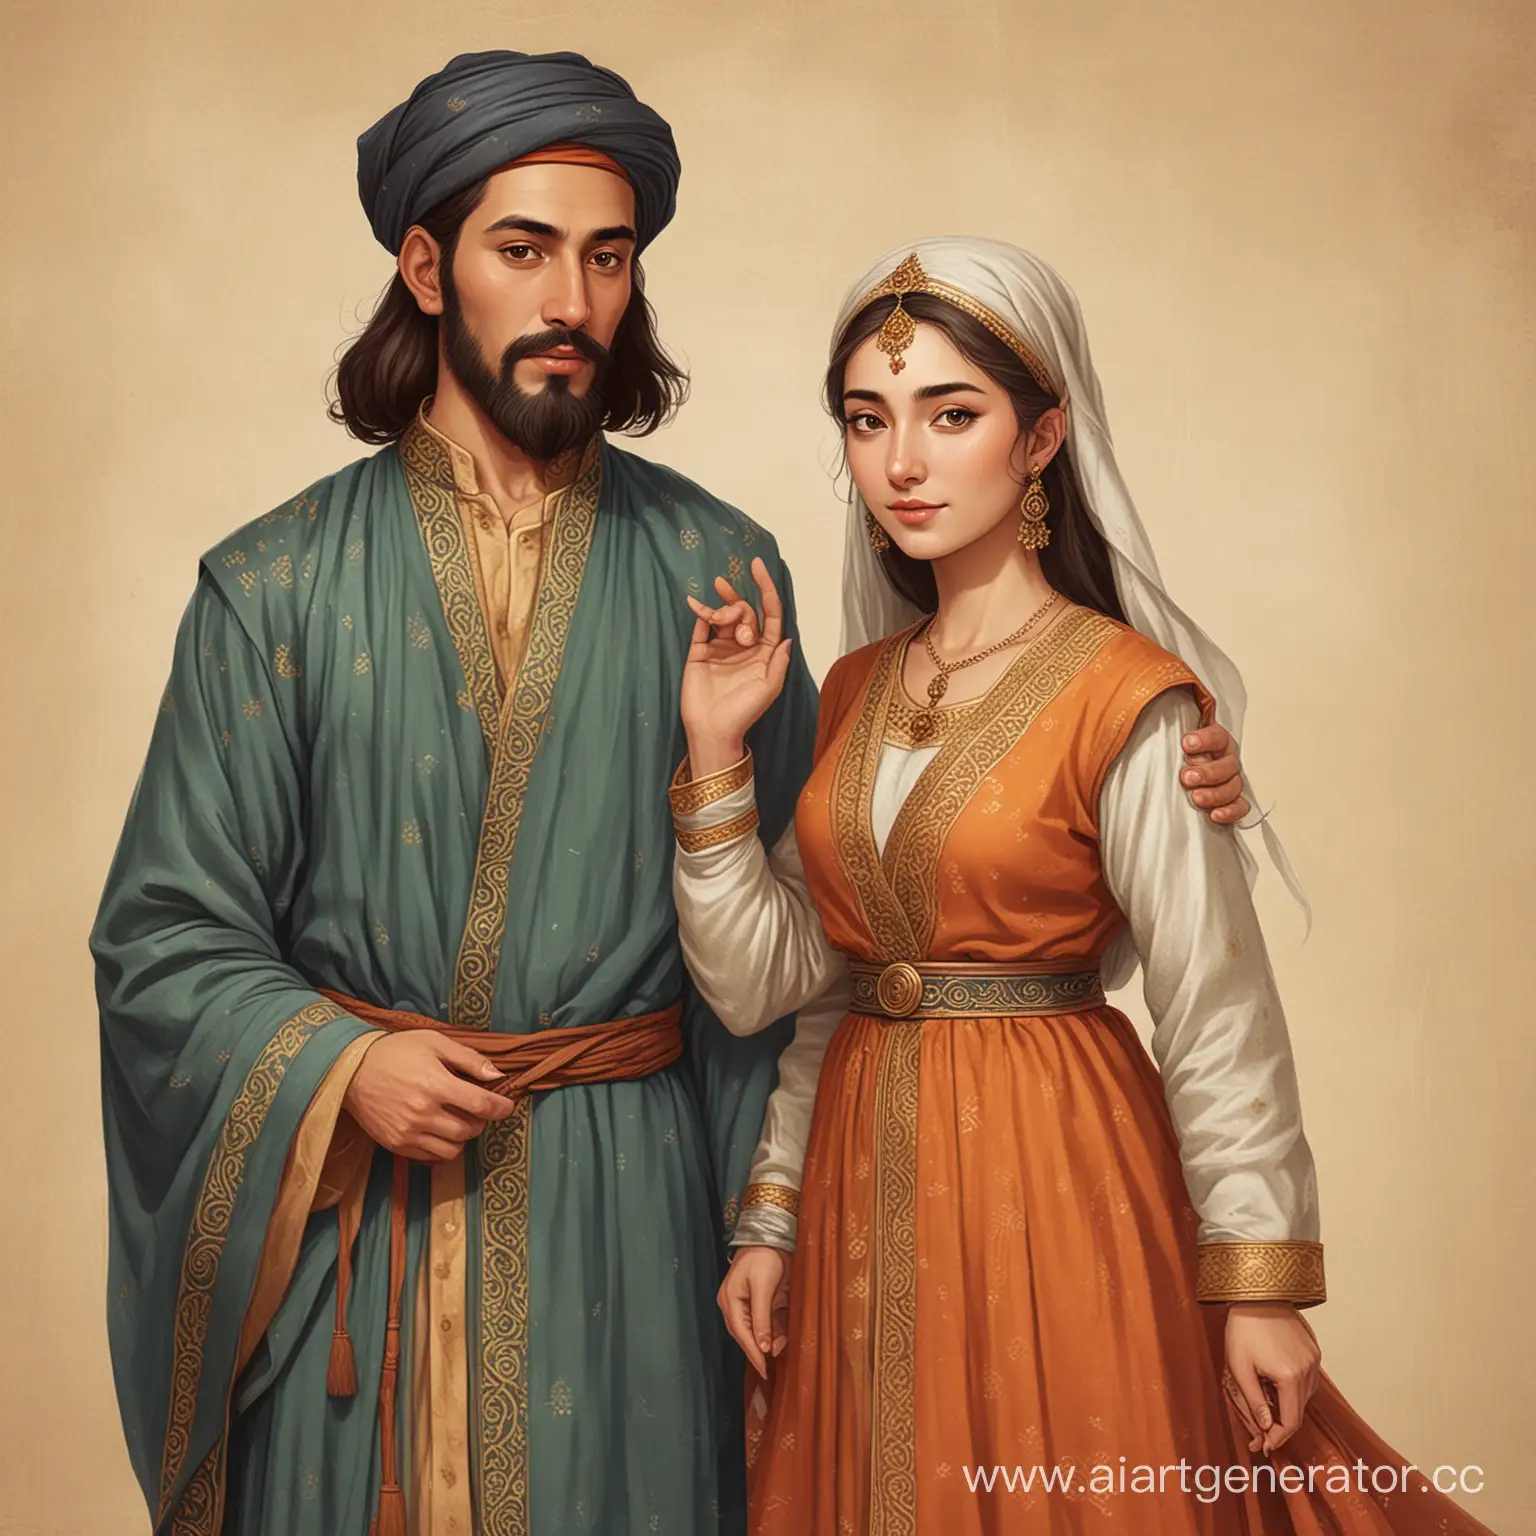 Medieval-Eastern-Couple-in-Traditional-Garb